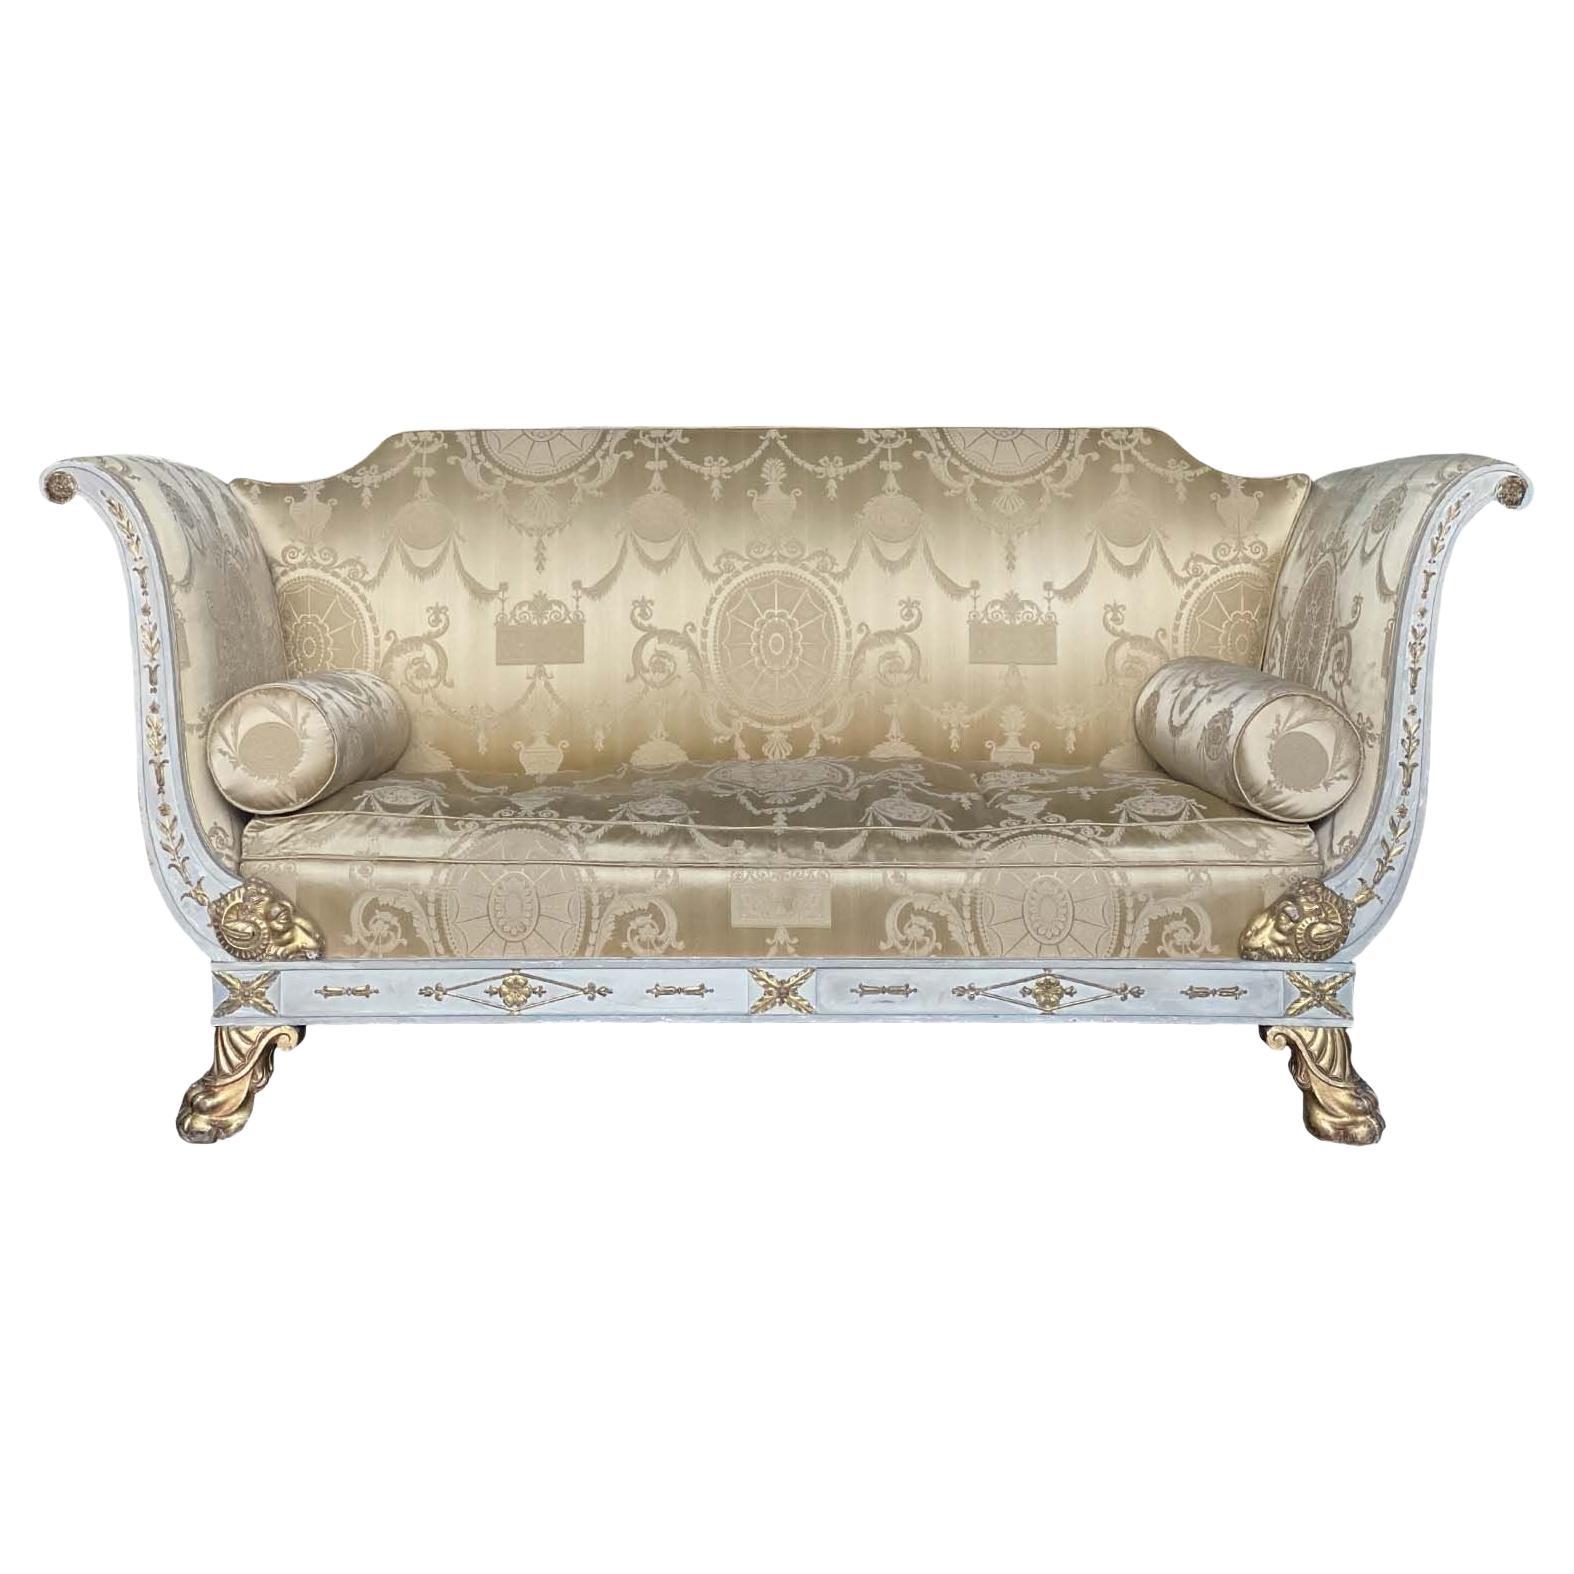 Late 19th Century French Empire Style Sofa For Sale